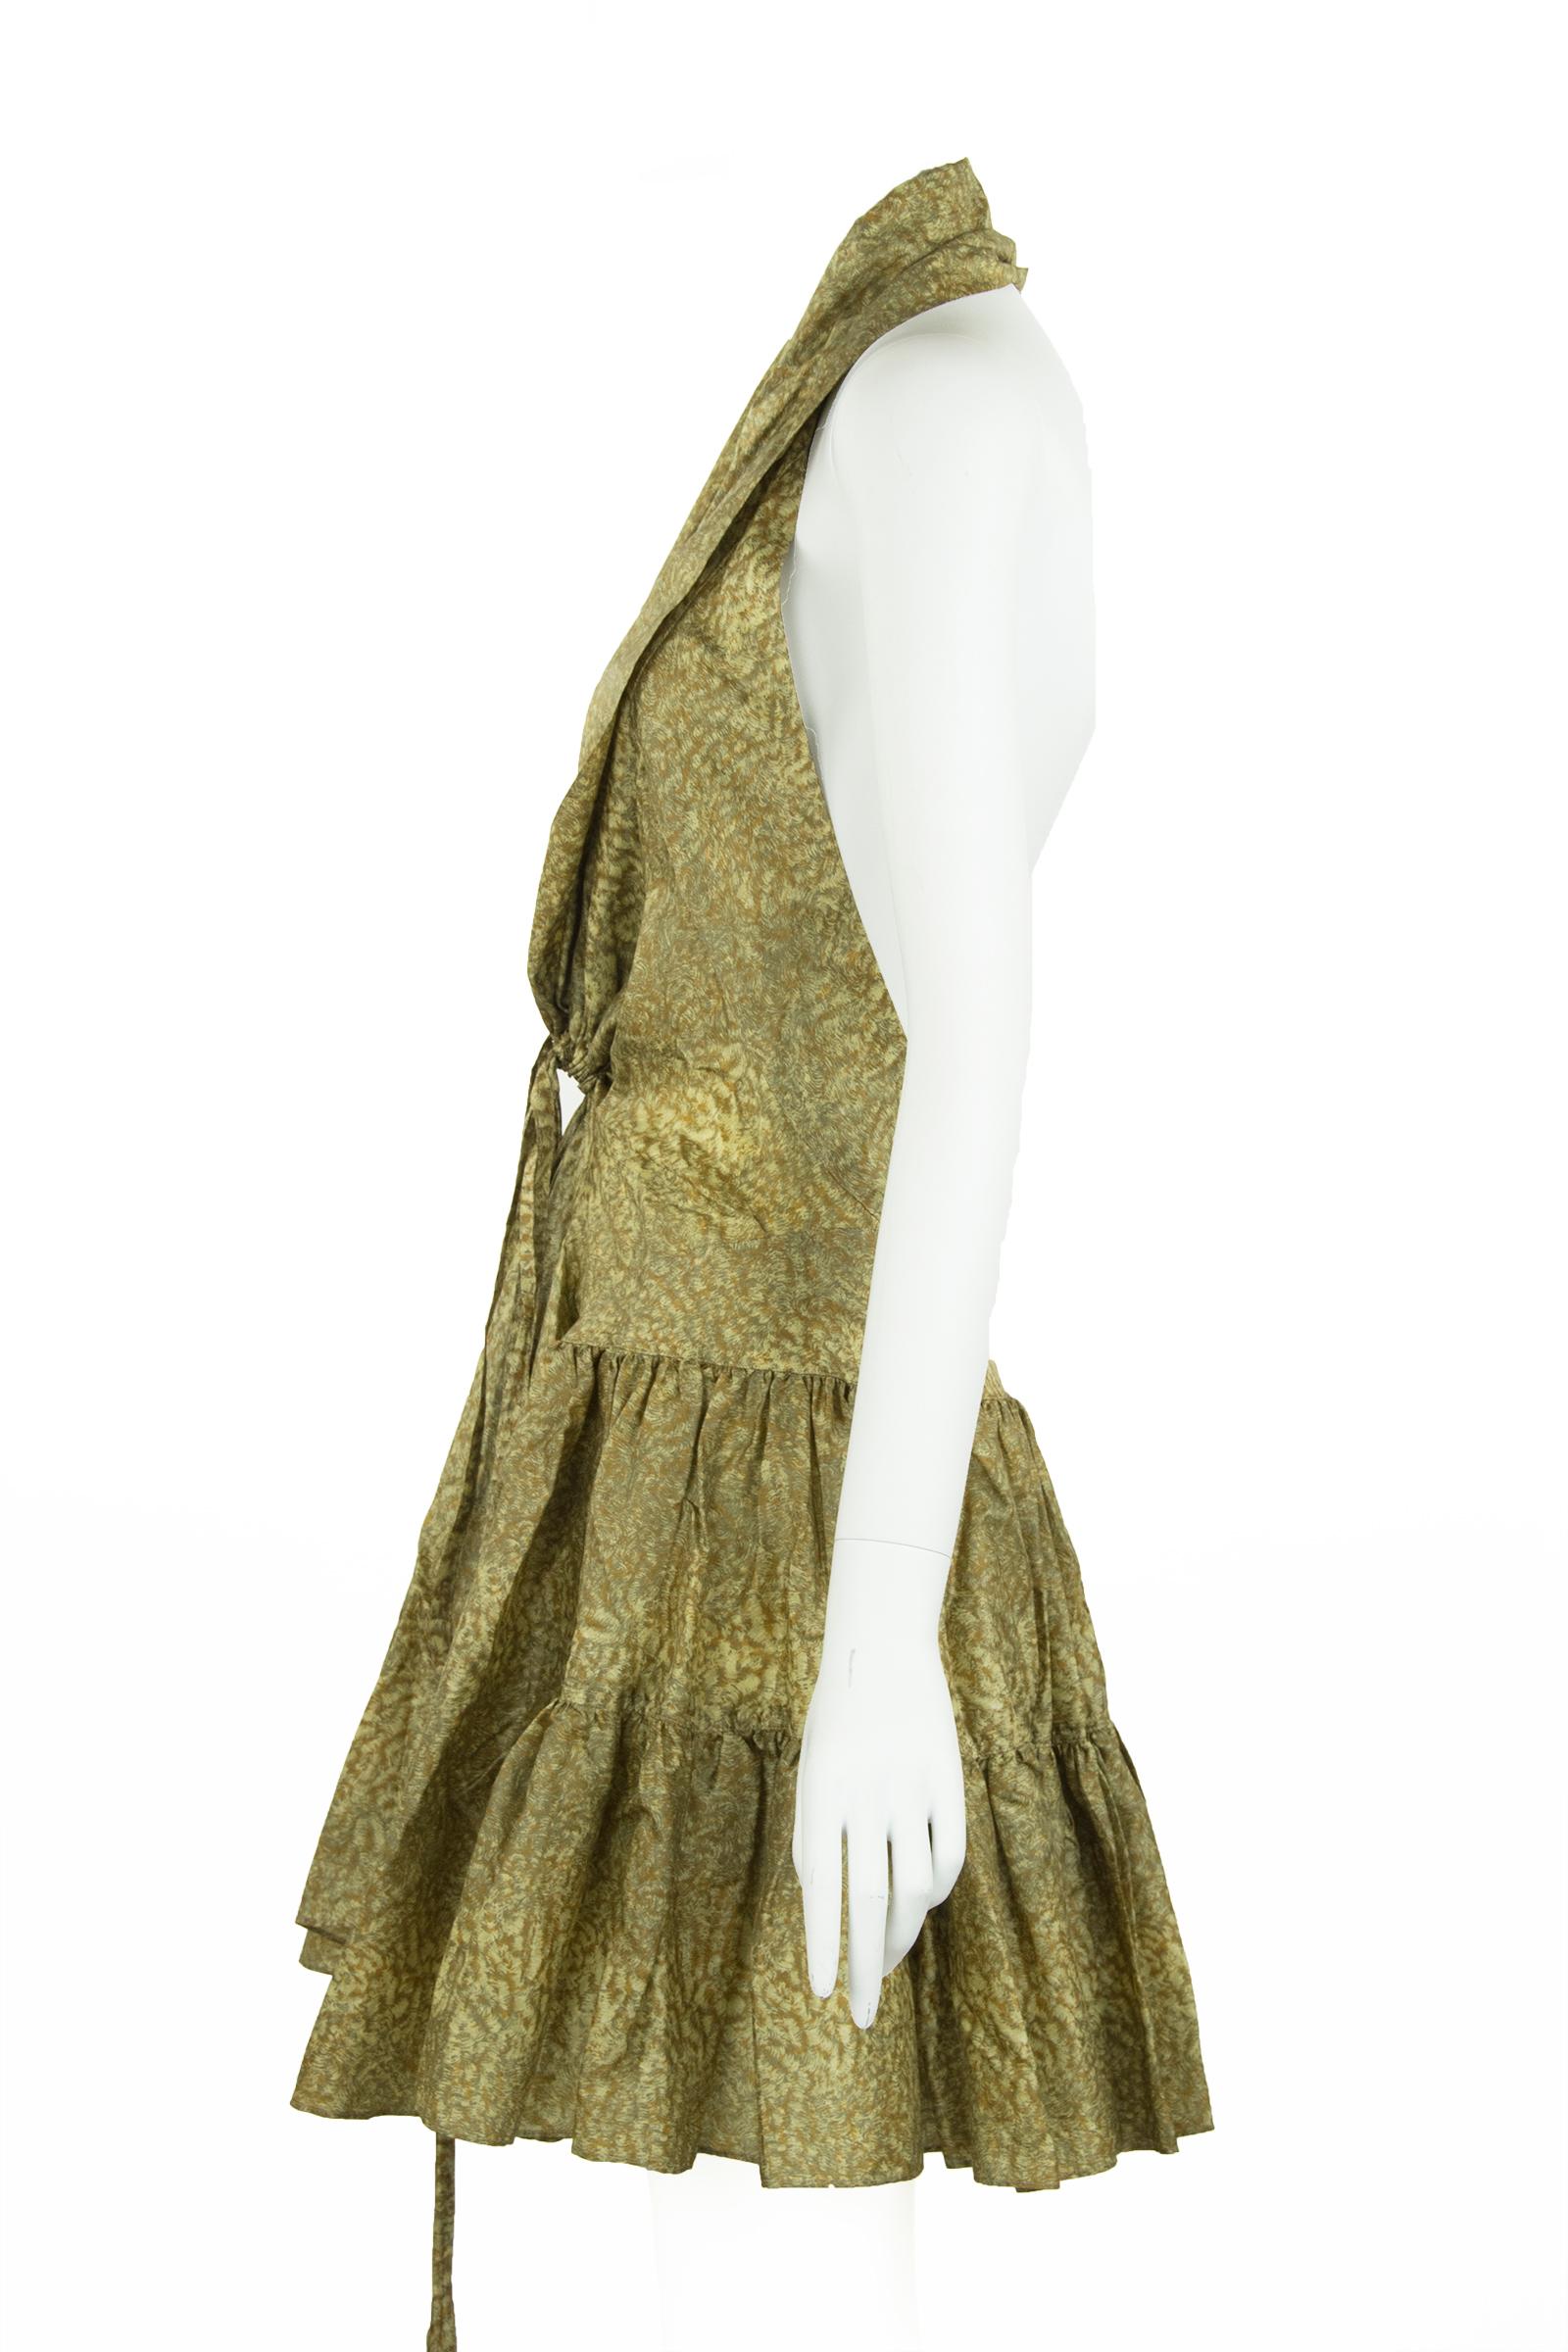 Fun and flirty Alaia printed silk dress in beautiful shades of green and brown.  Features a halter neck and ruffle tiers on the skirt.  Ties in the front.  

Size: FR 44

Condition: Excellent condition

Composition: 86% silk, 14% acrylic

Care: Dry